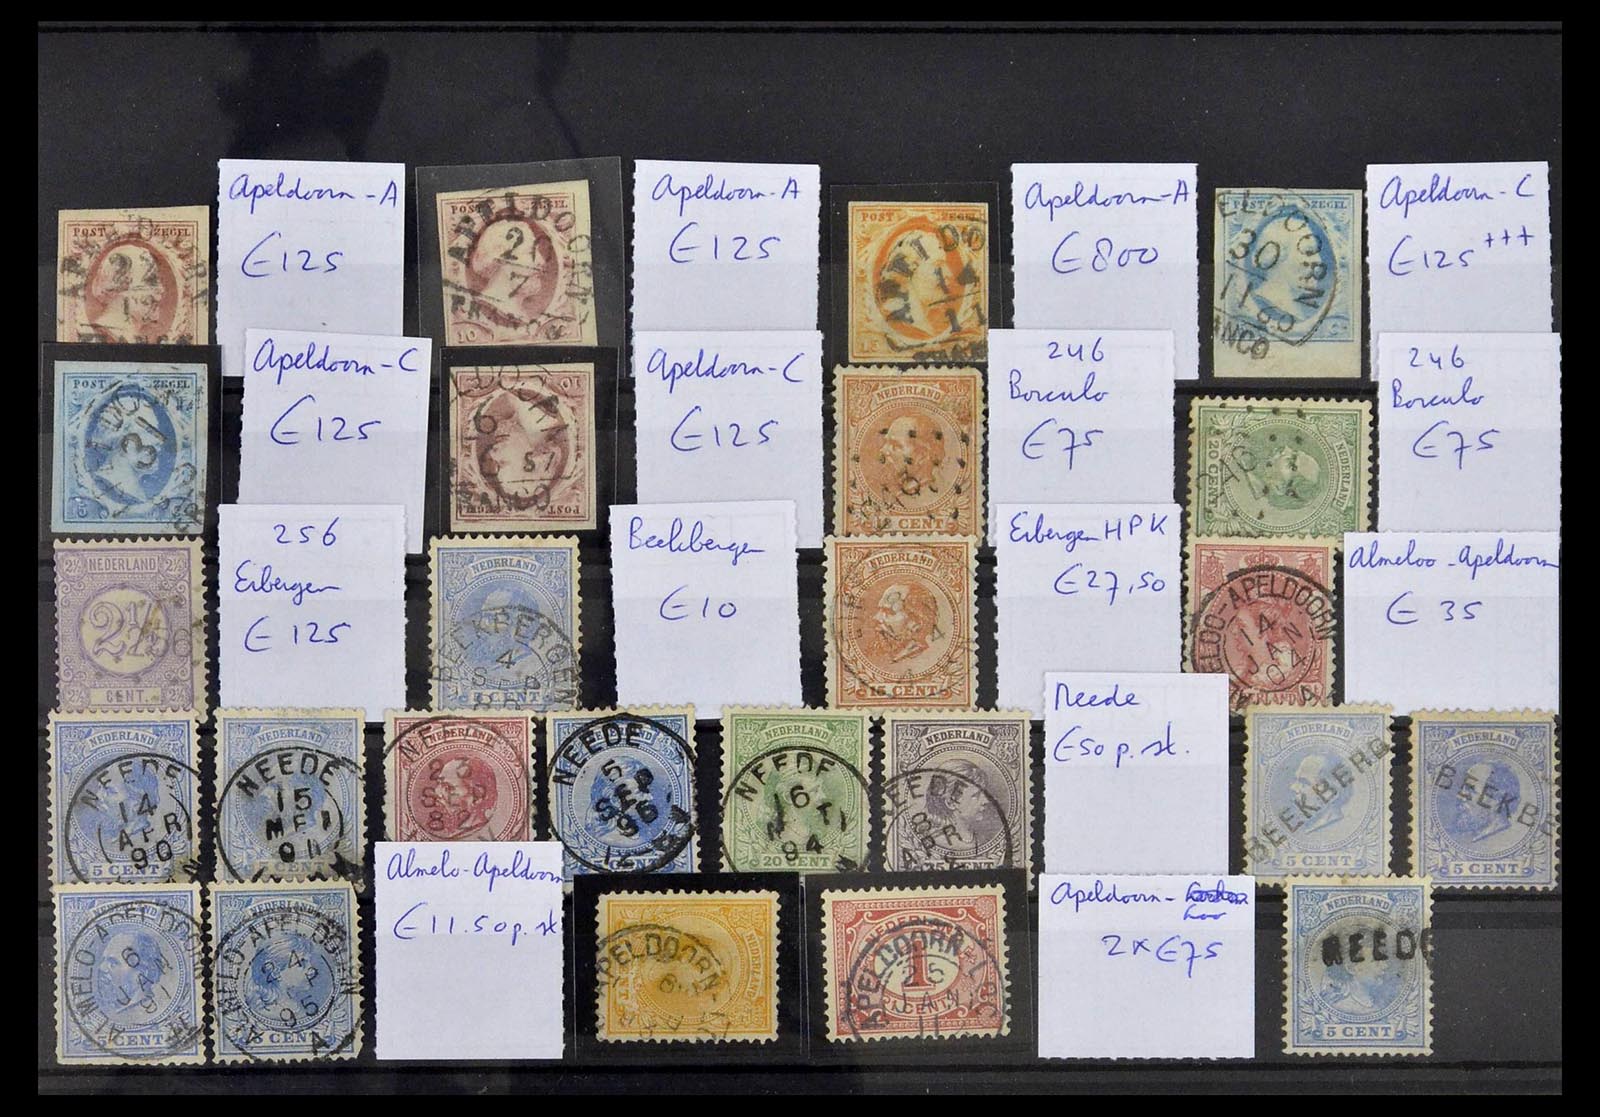 39372 0001 - Stamp collection 39372 Netherlands cancels 1852-1899.